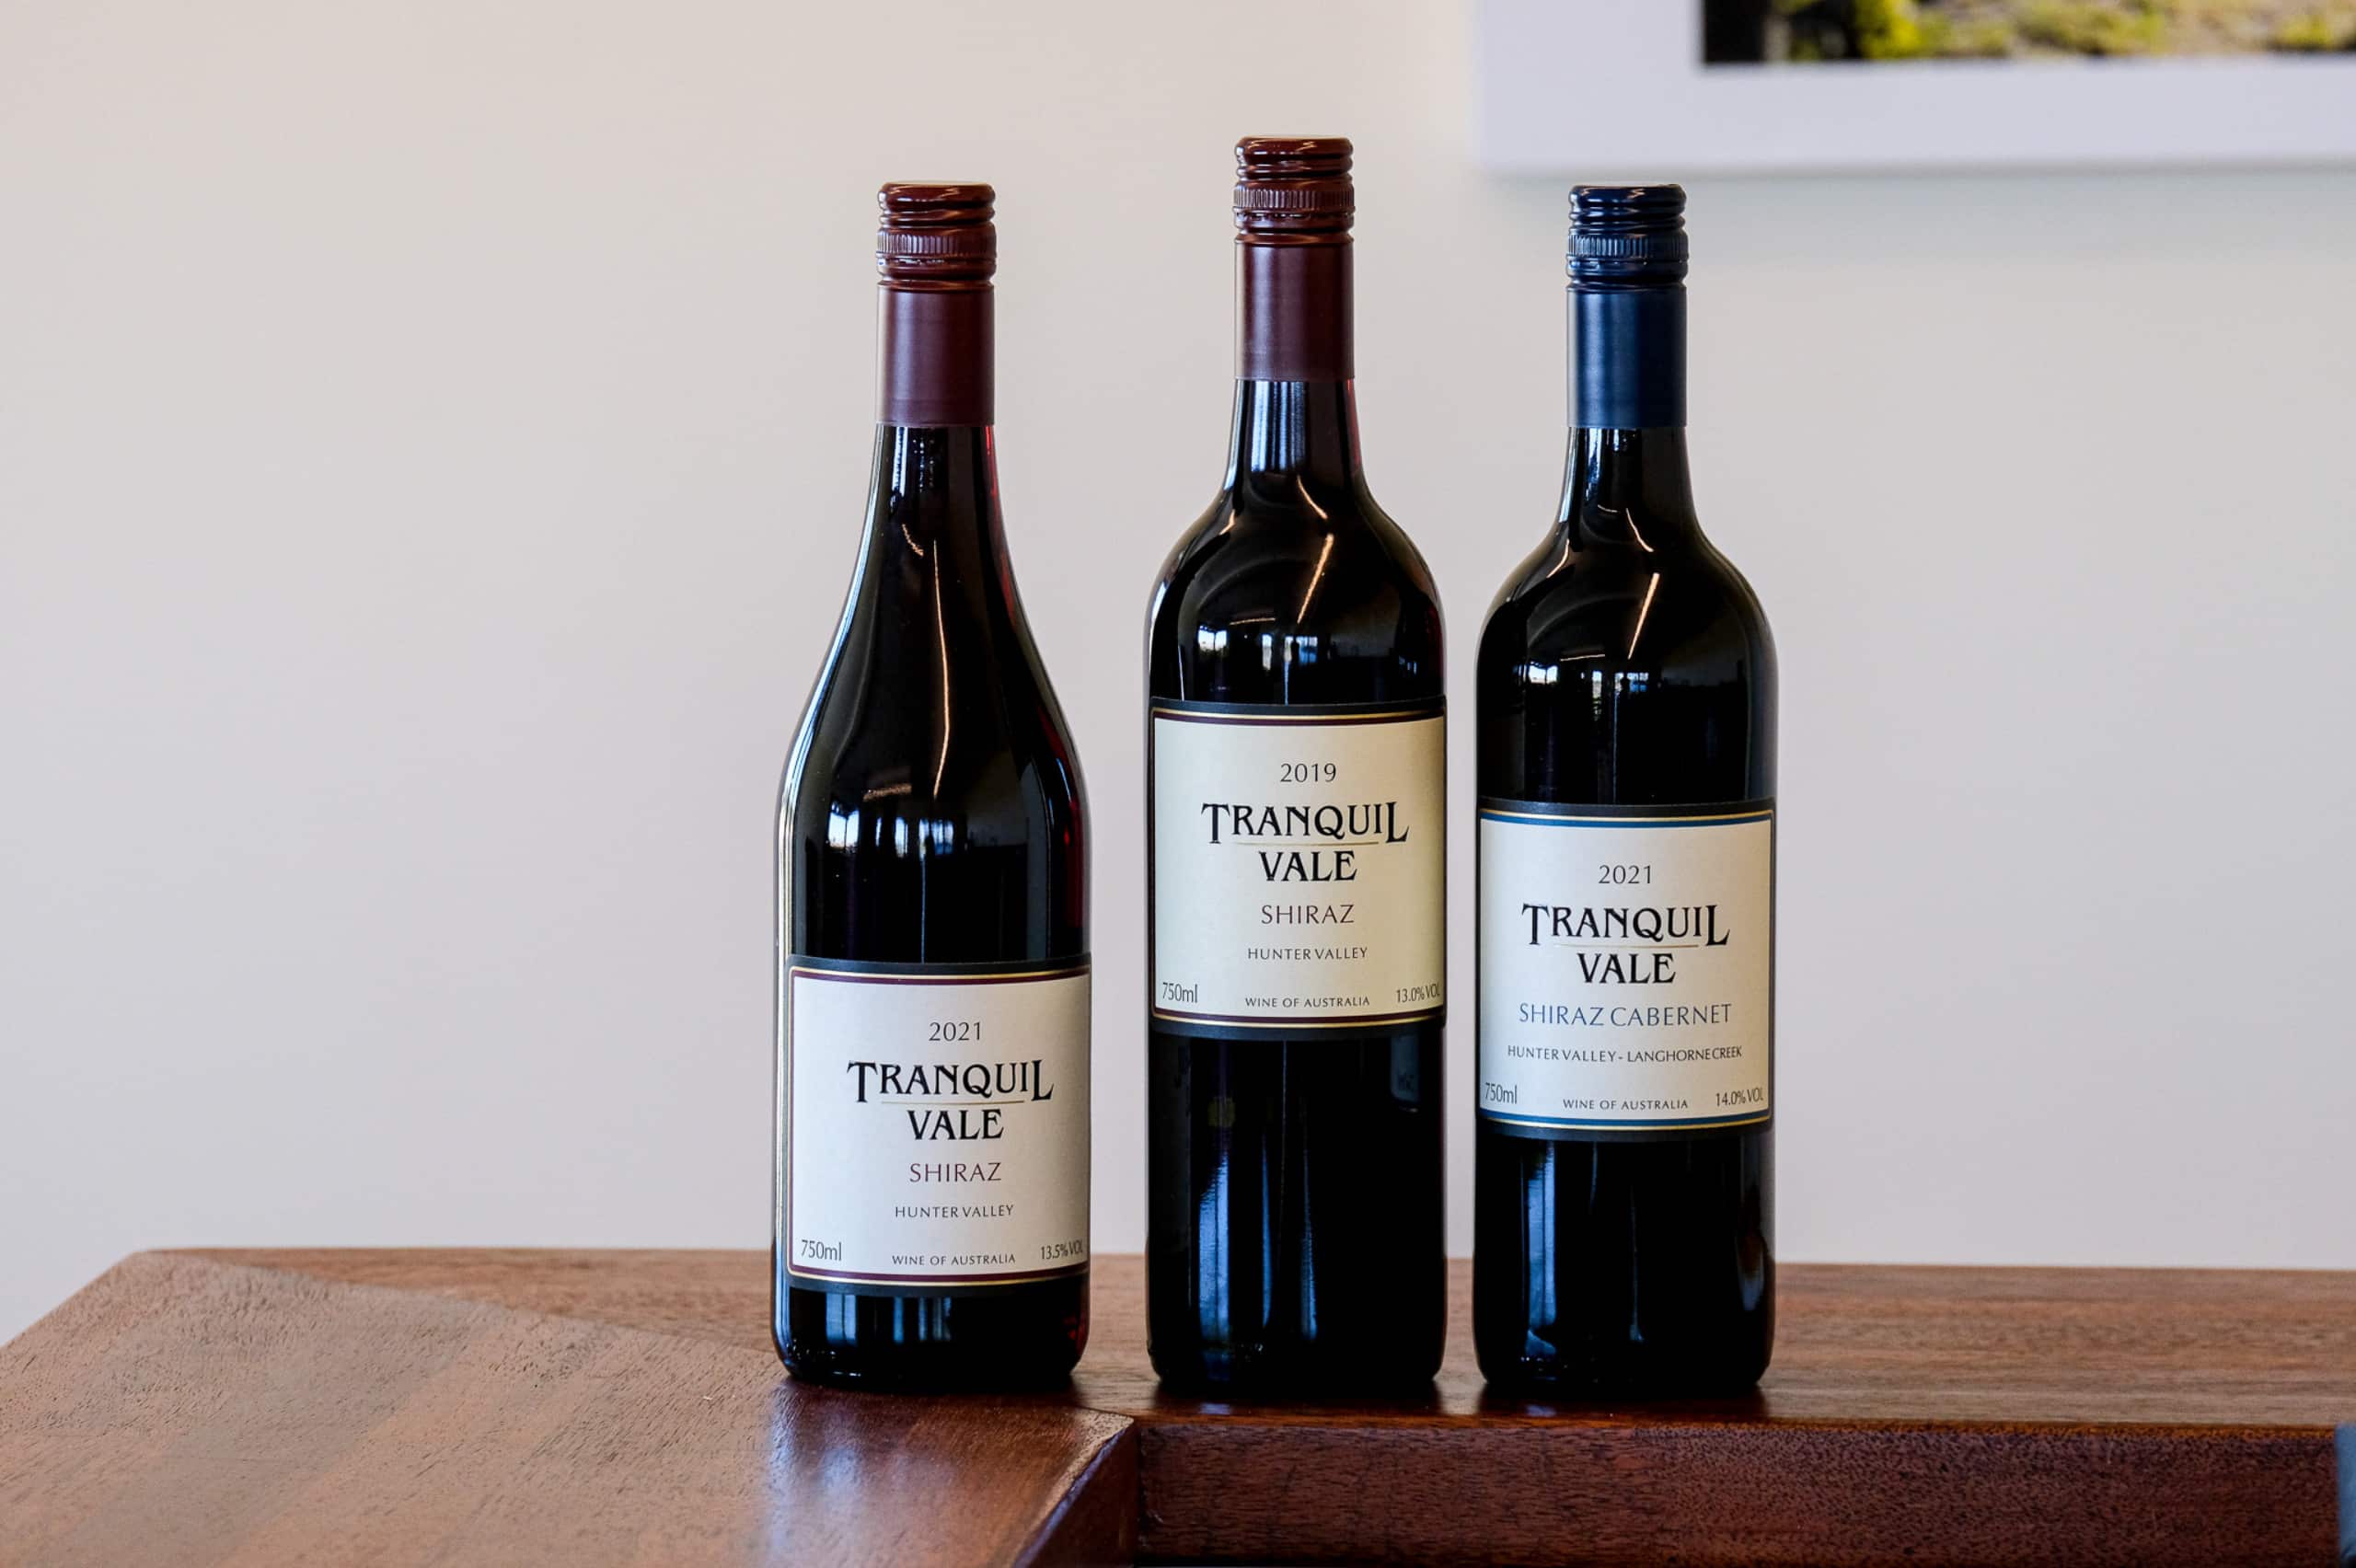 Bottles of Shiraz and Shiraz Cabernet from Tranquil Vale